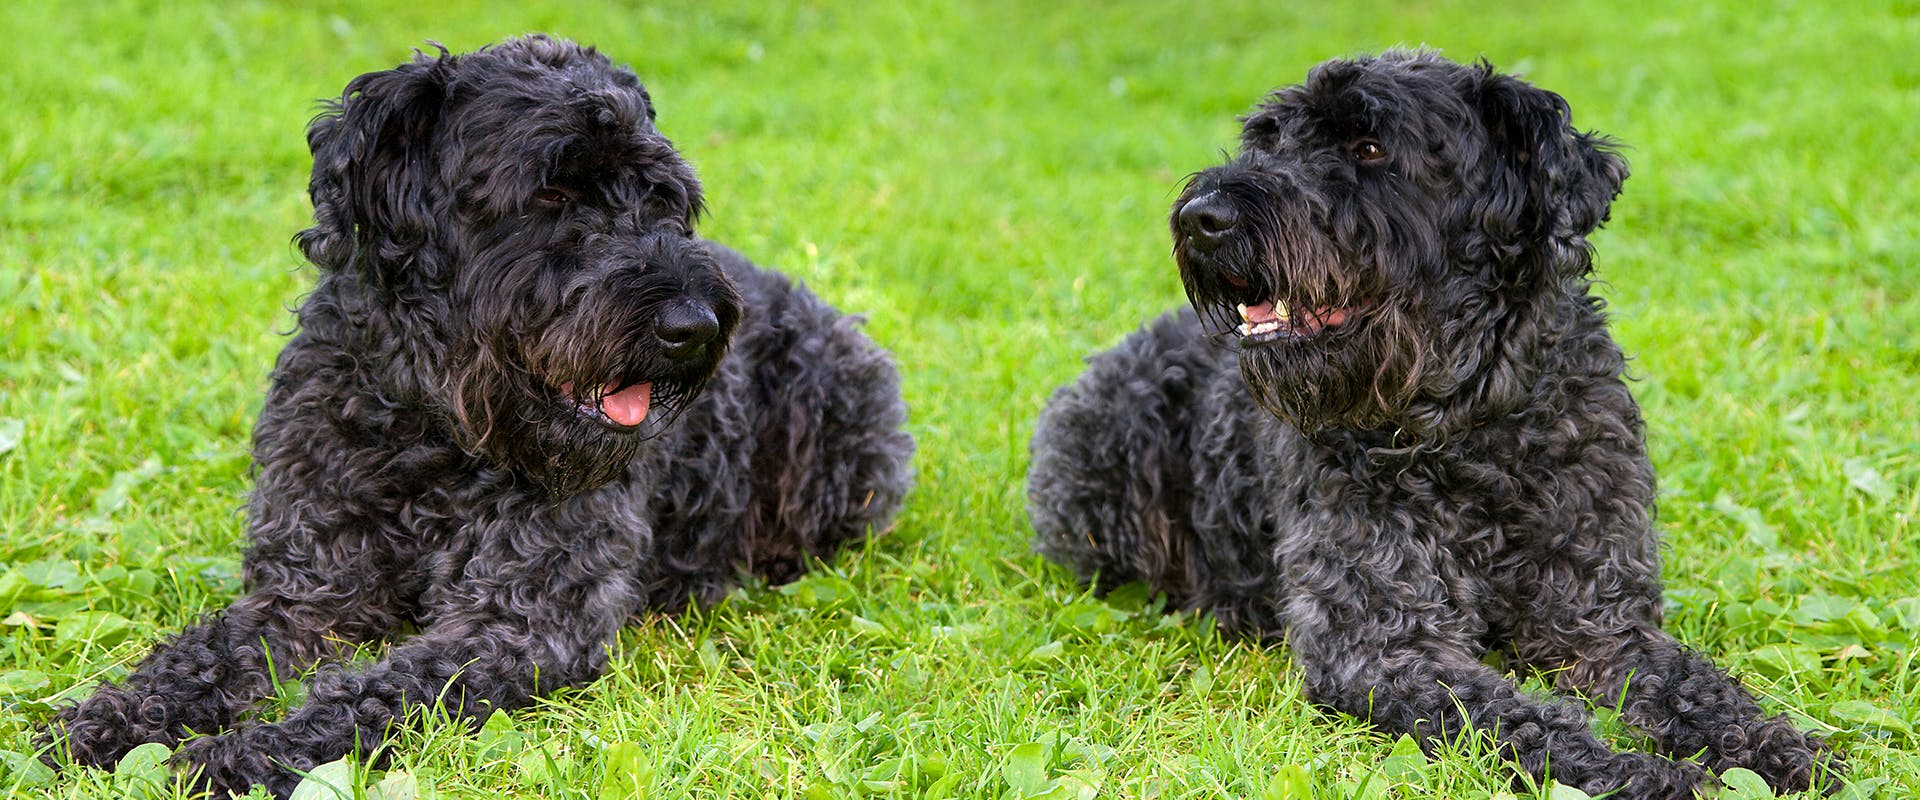 Two black Kerry Blue Terrier dogs sitting on a patch of green grass